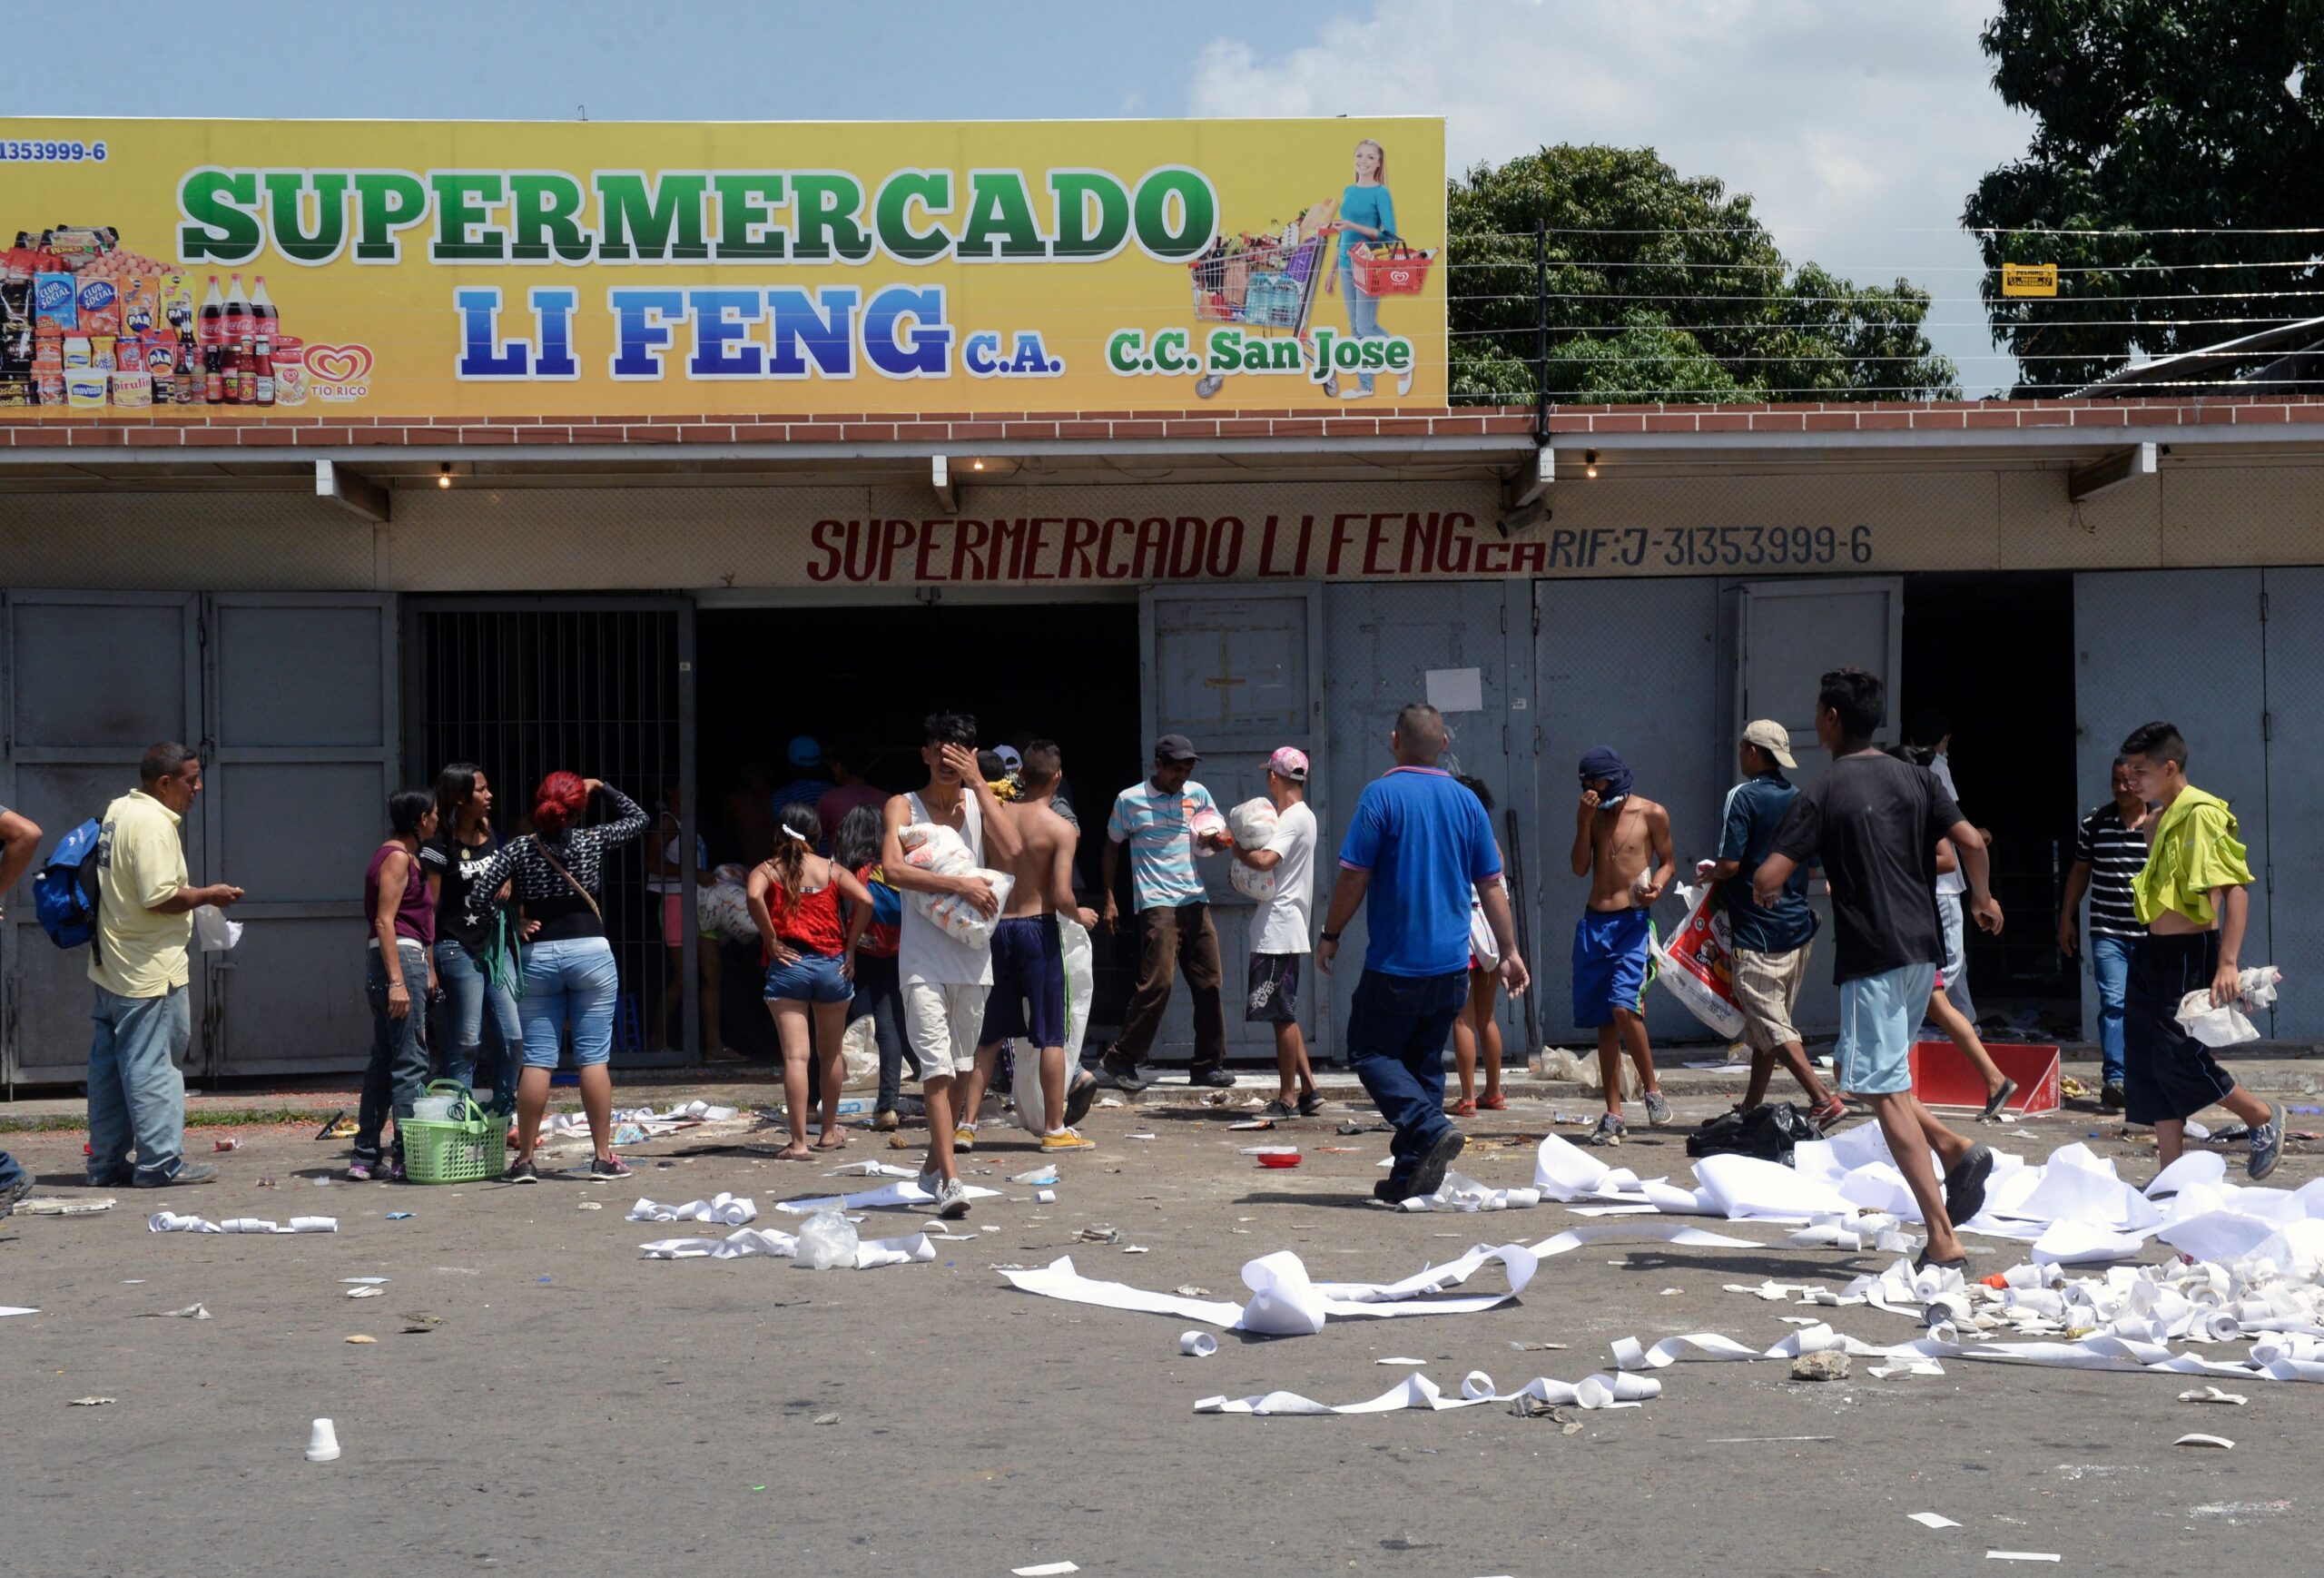 Covid-19 in Venezuela: How the Pandemic Deepened a Humanitarian Crisis